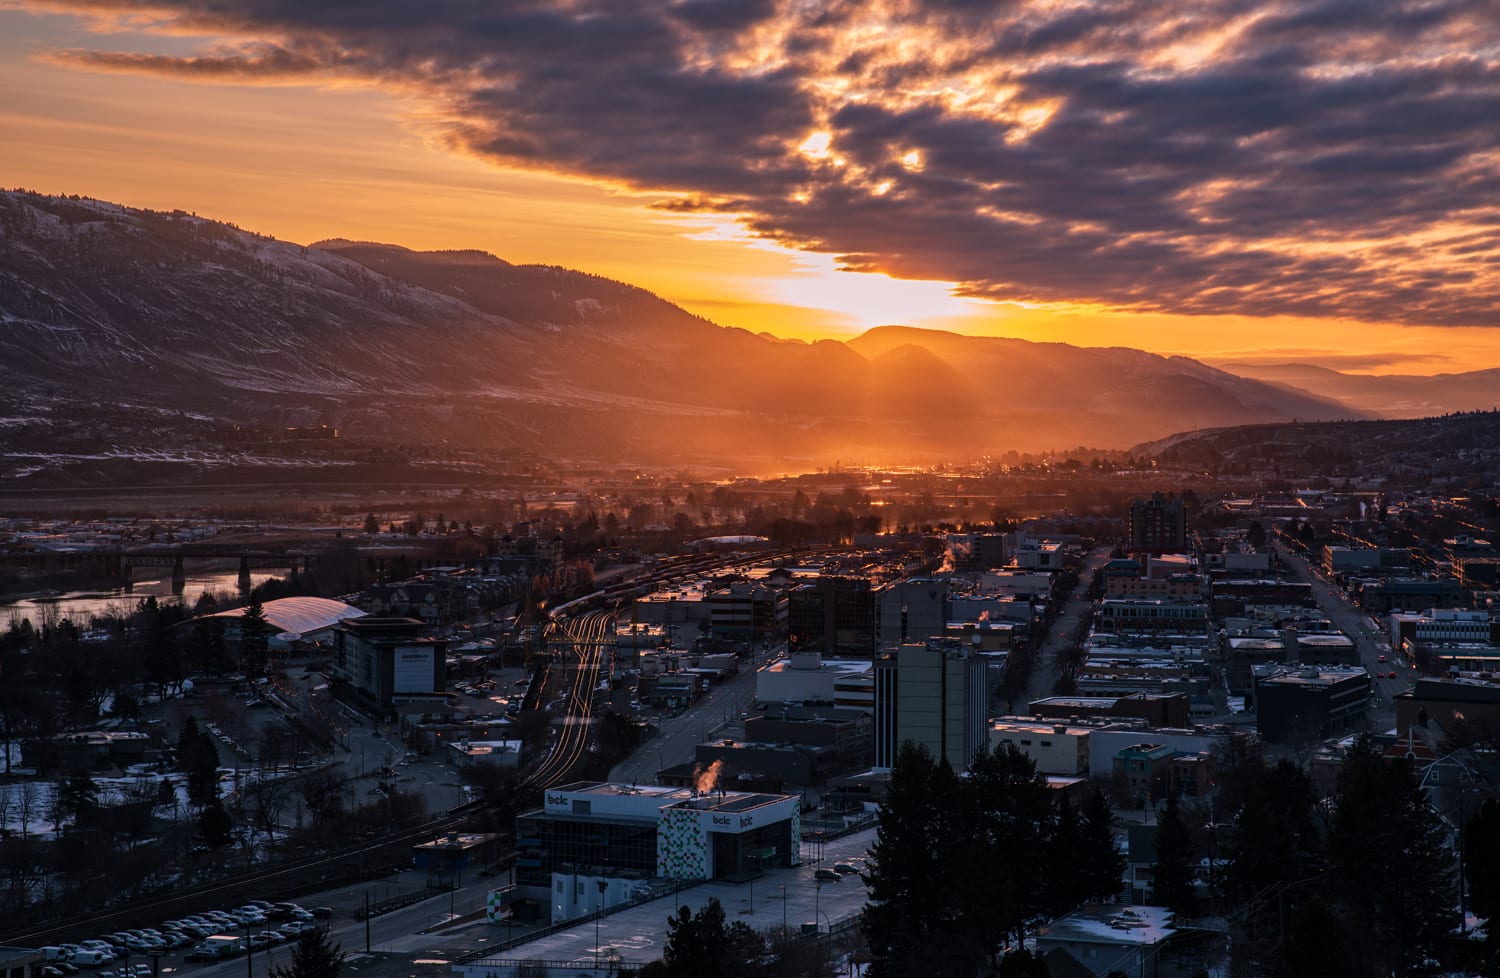 Kamloops City closeup of city with clouds and setting sun with mountains